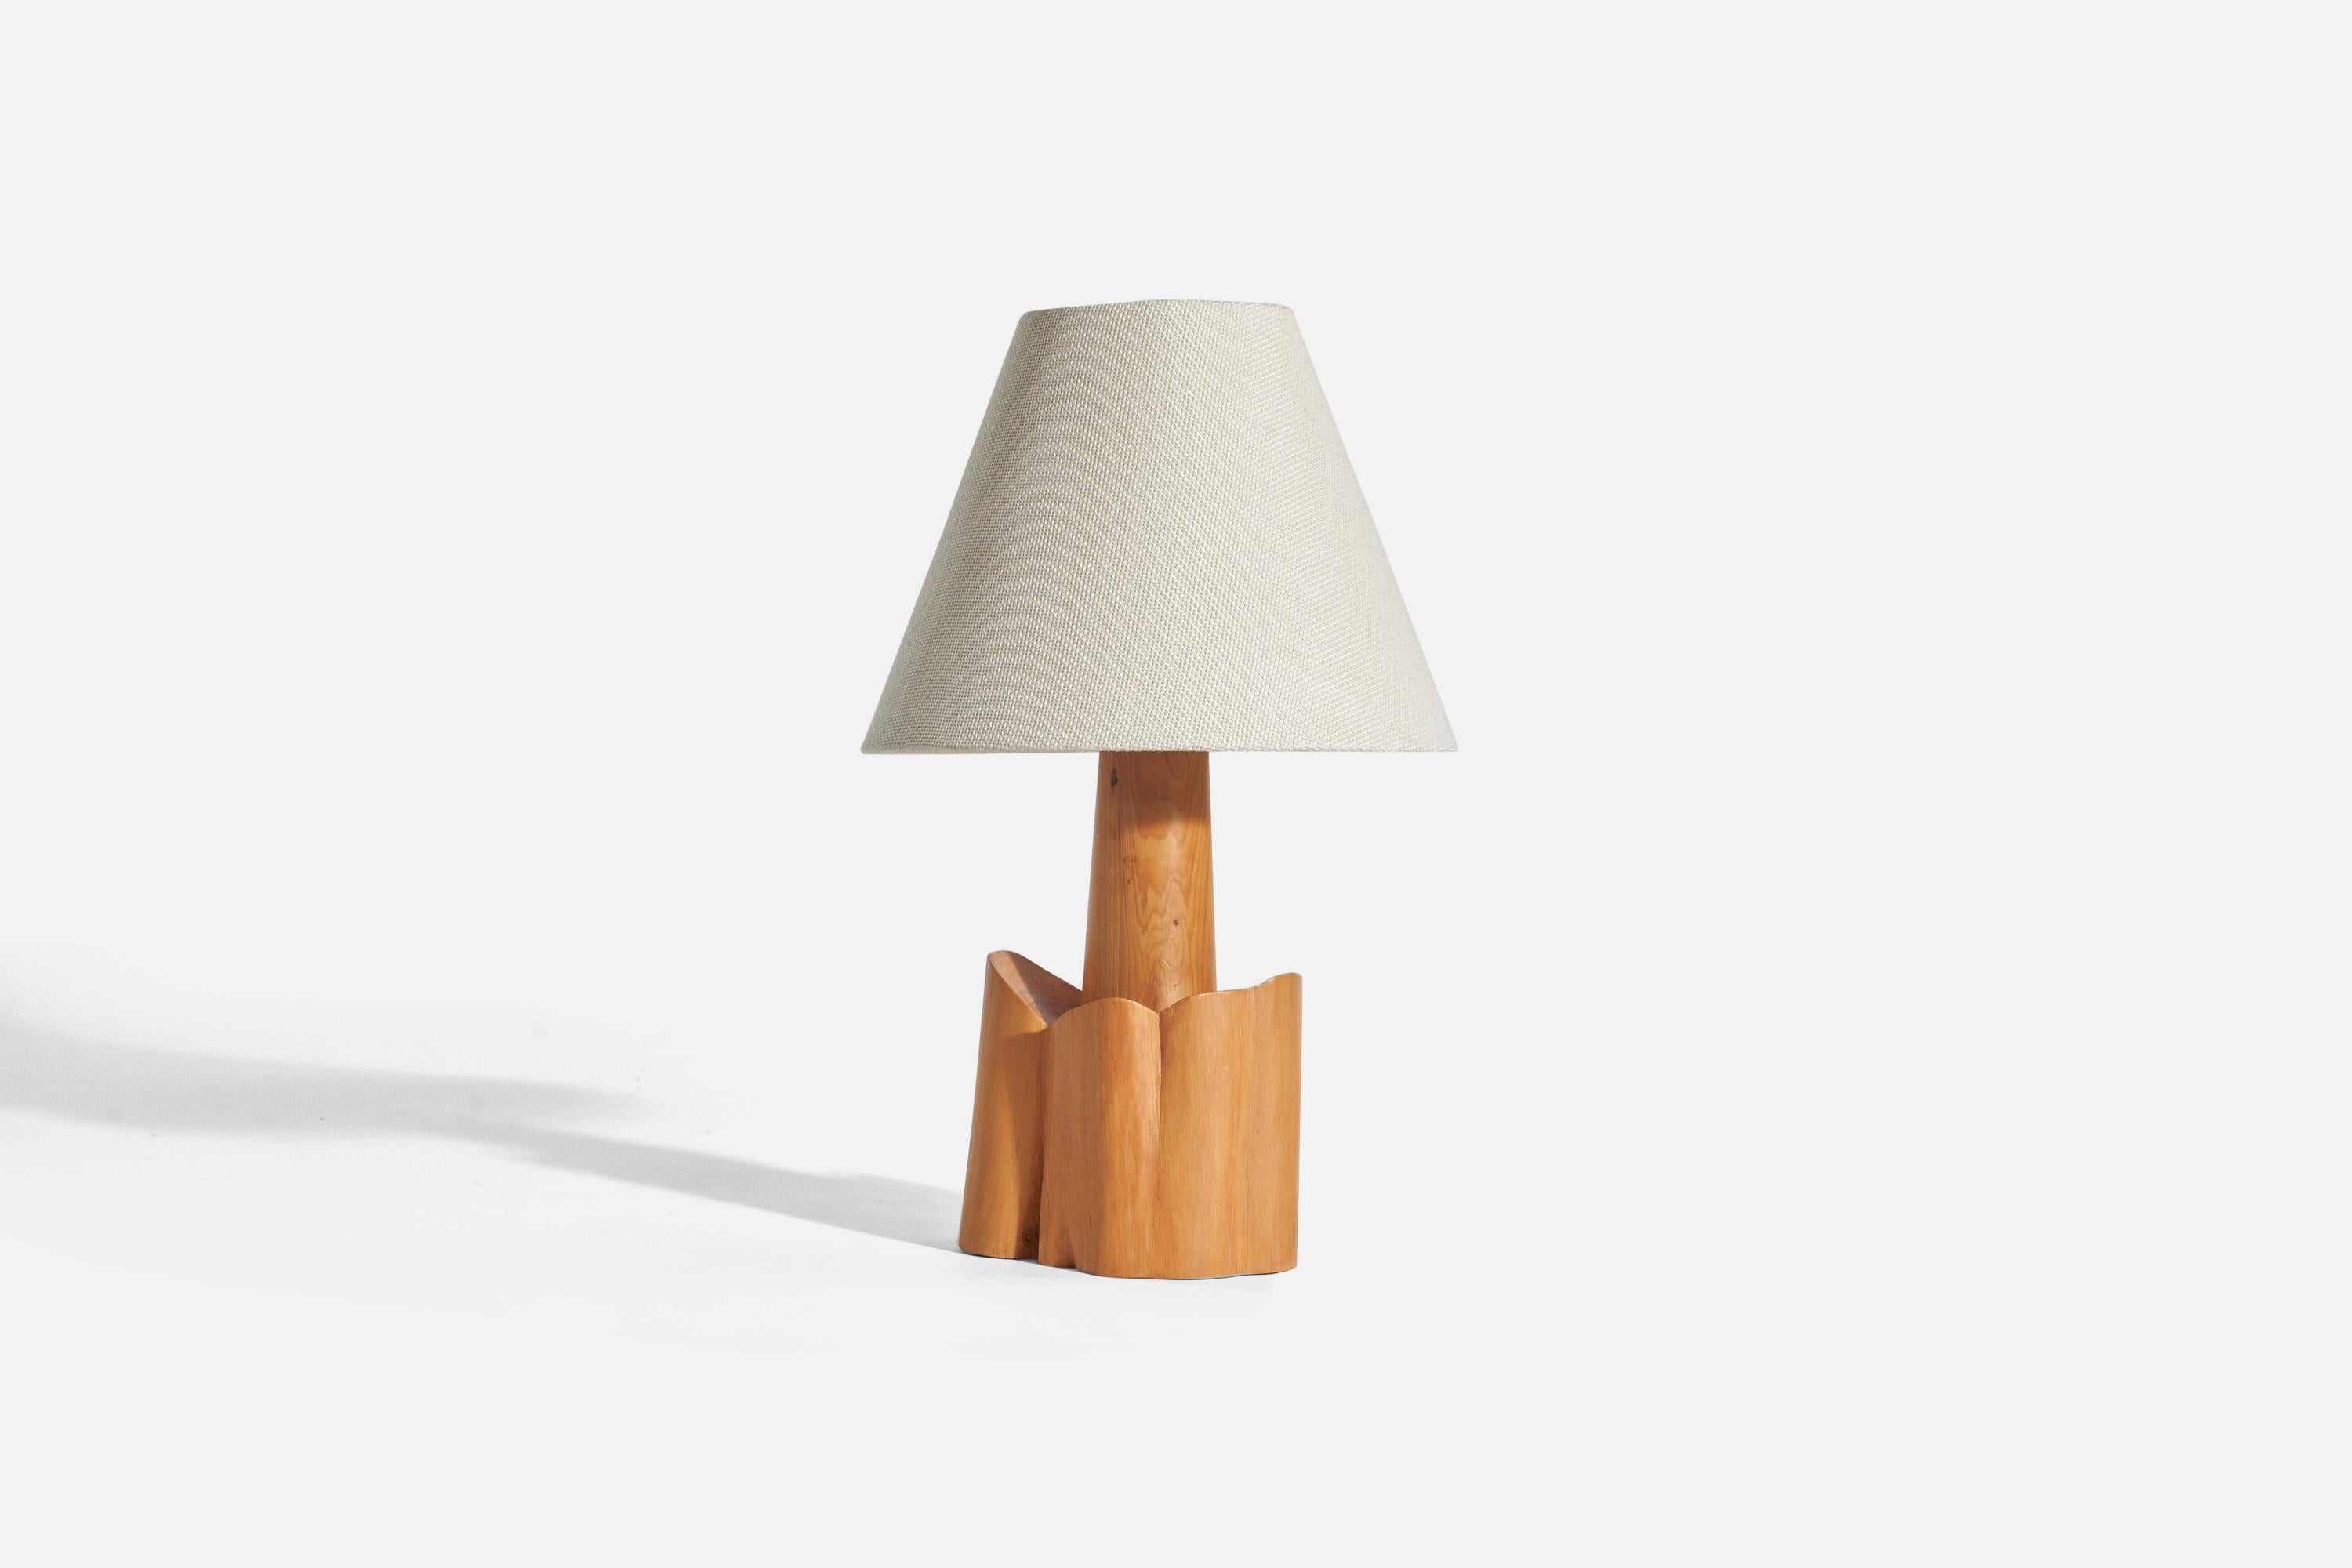 A wooden table lamp designed and produced in Sweden, 1981.

Sold without lampshade(s)
Dimensions of lamp (inches) : 9.43 x 4.66 x 3.16 (Height x Width x Depth)
Dimensions of shade (inches) : 3.75 x 8 x 6.25 (Top Diameter x Bottom Diameter x